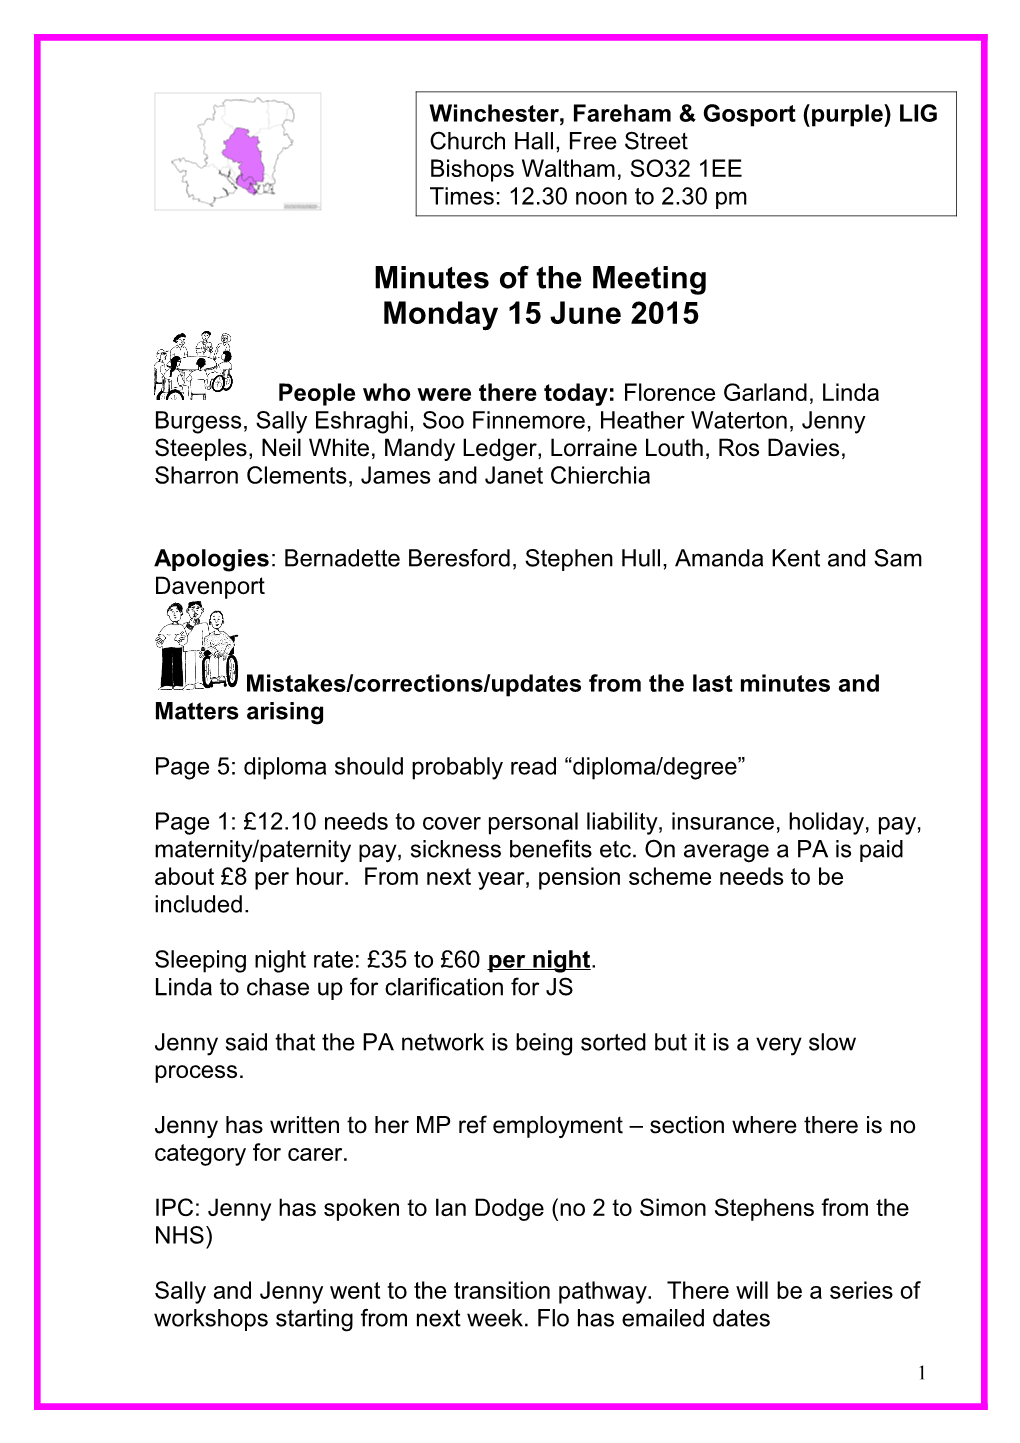 Minutes of the Meeting s17